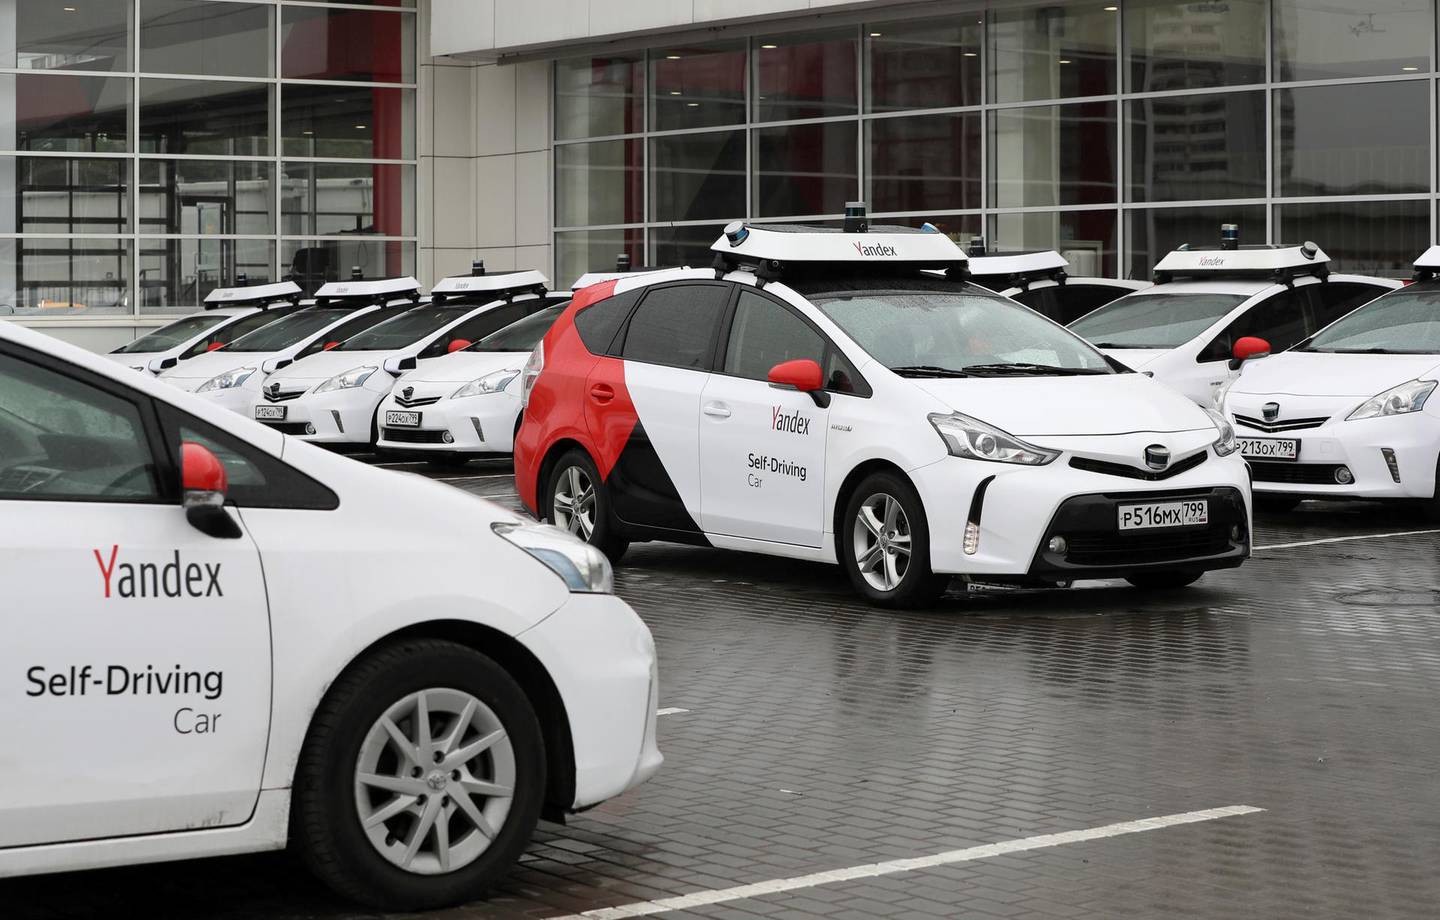 A view shows self-driving cars owned and tested by Yandex company during a presentation in Moscow, Russia August 16, 2019. Picture taken August 16, 2019. REUTERS/Evgenia Novozhenina